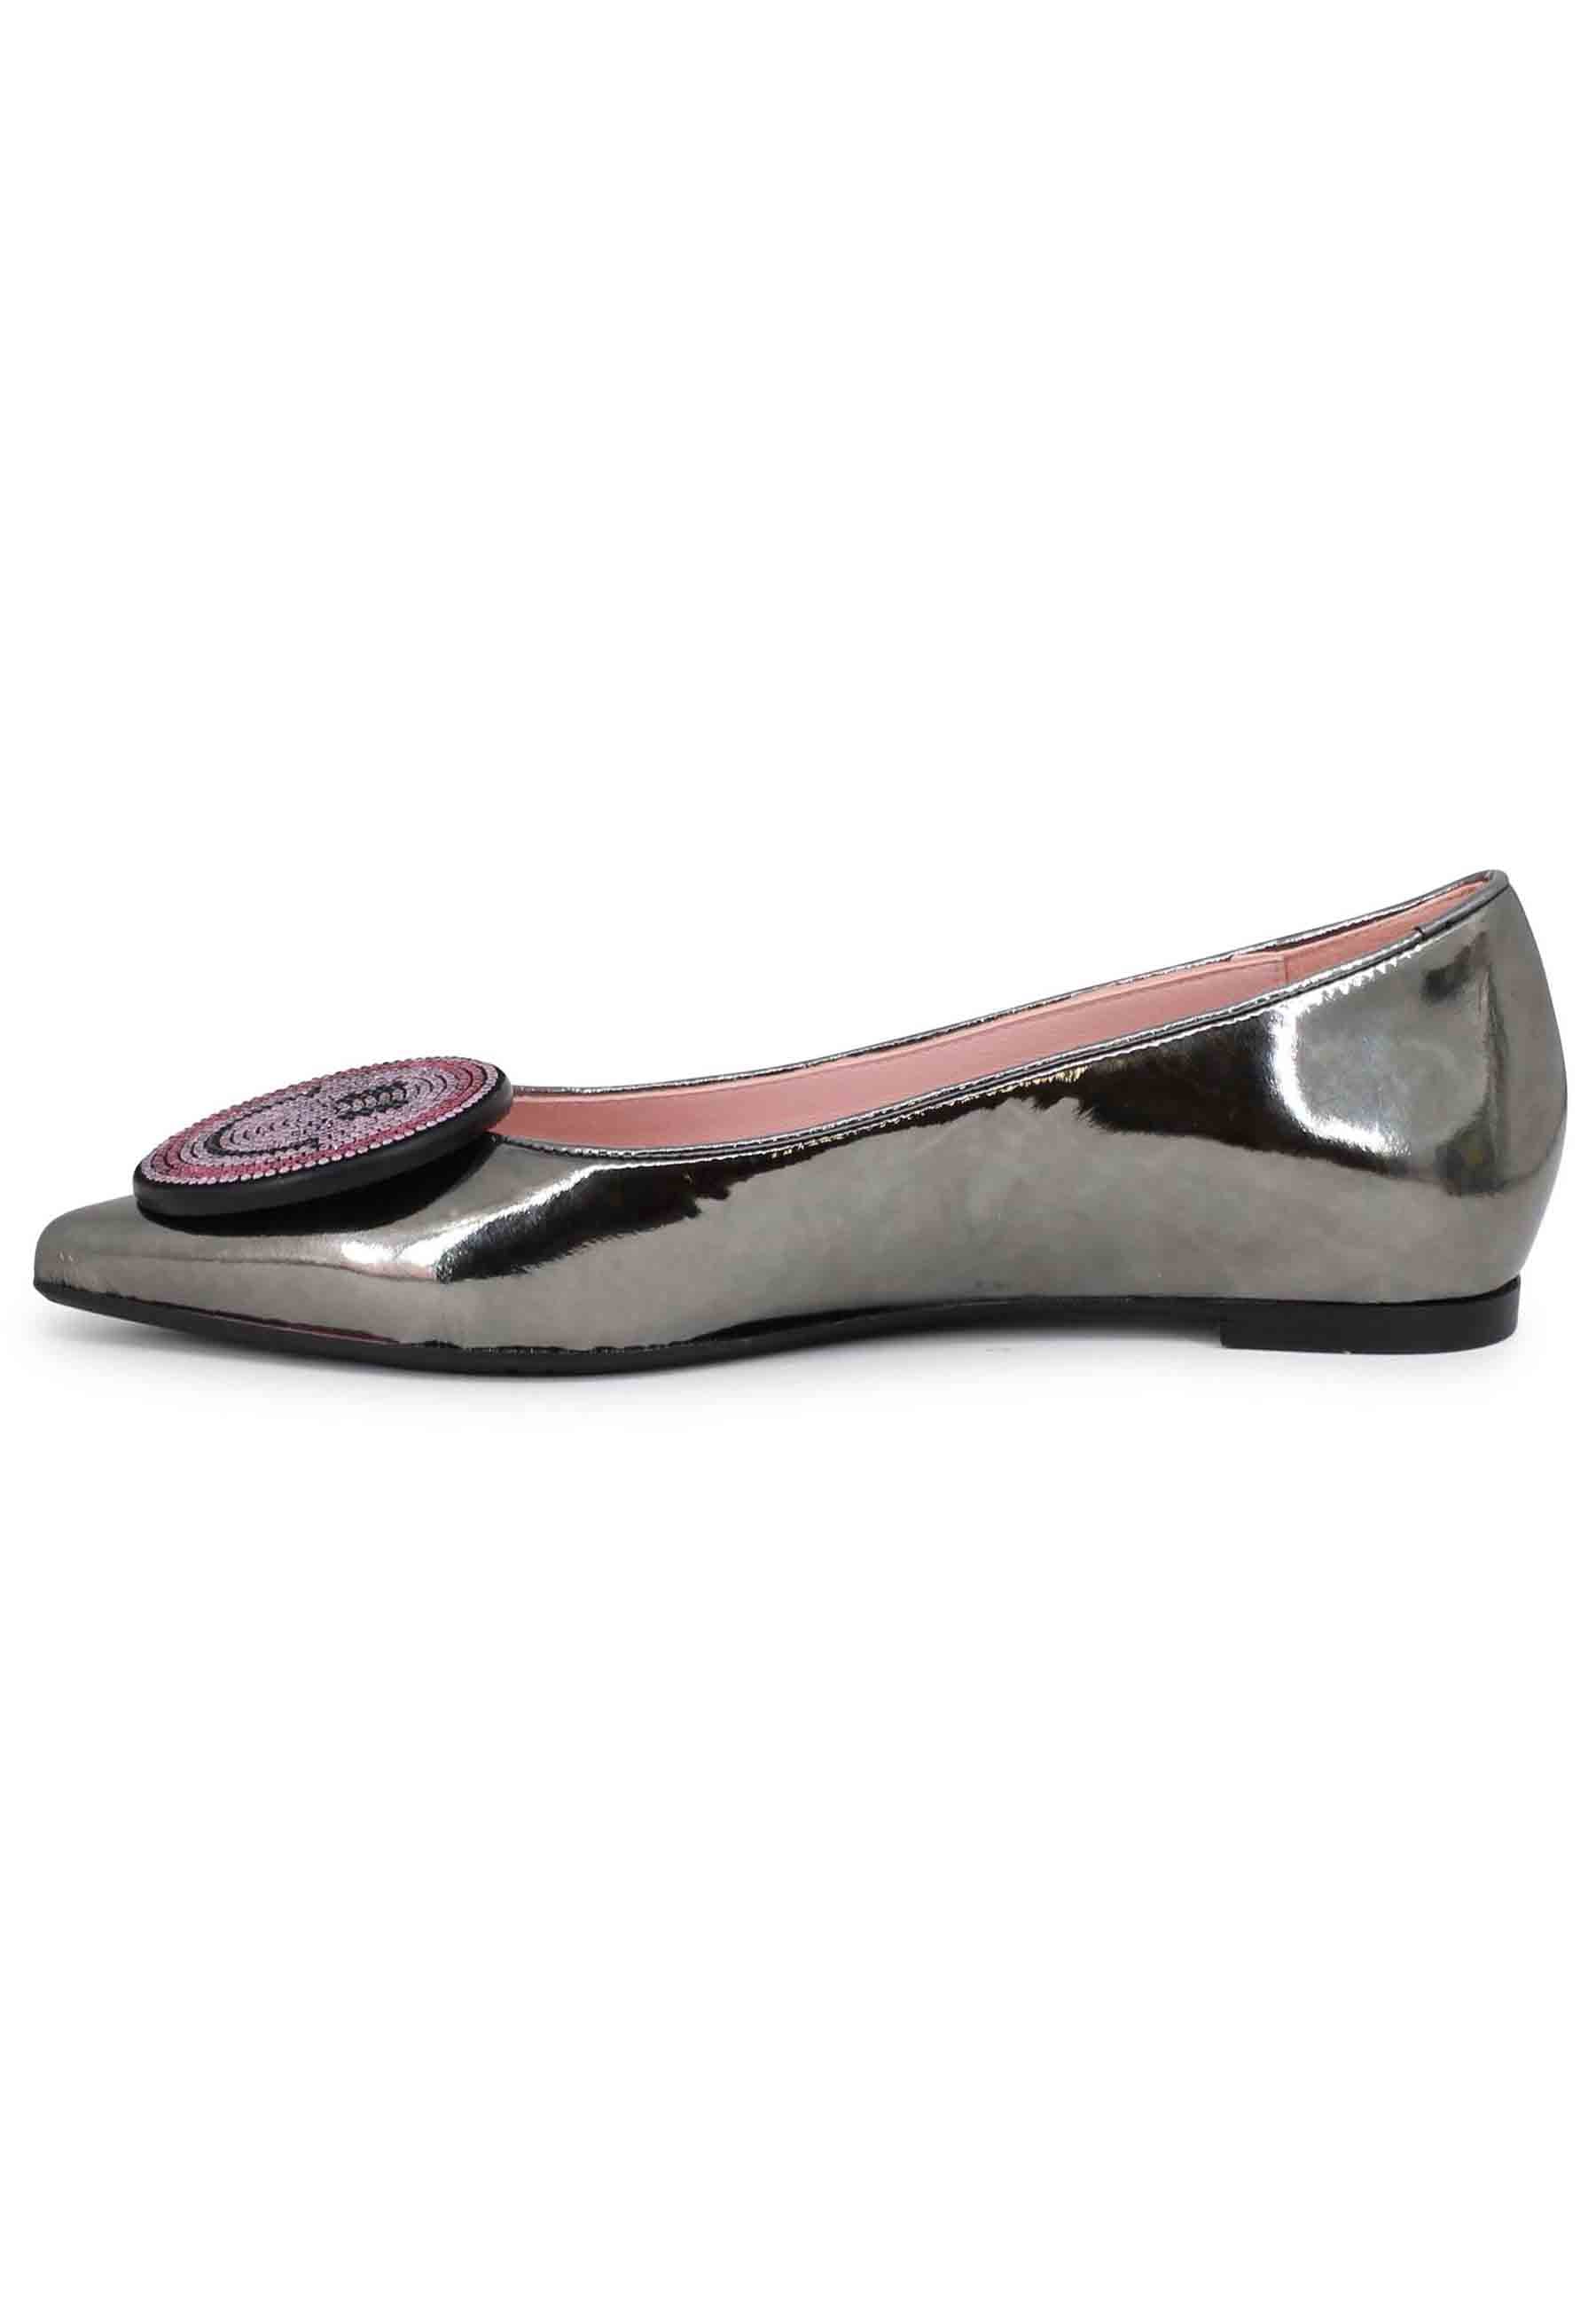 Women's ballet flats in mirror gray patent leather with buckle